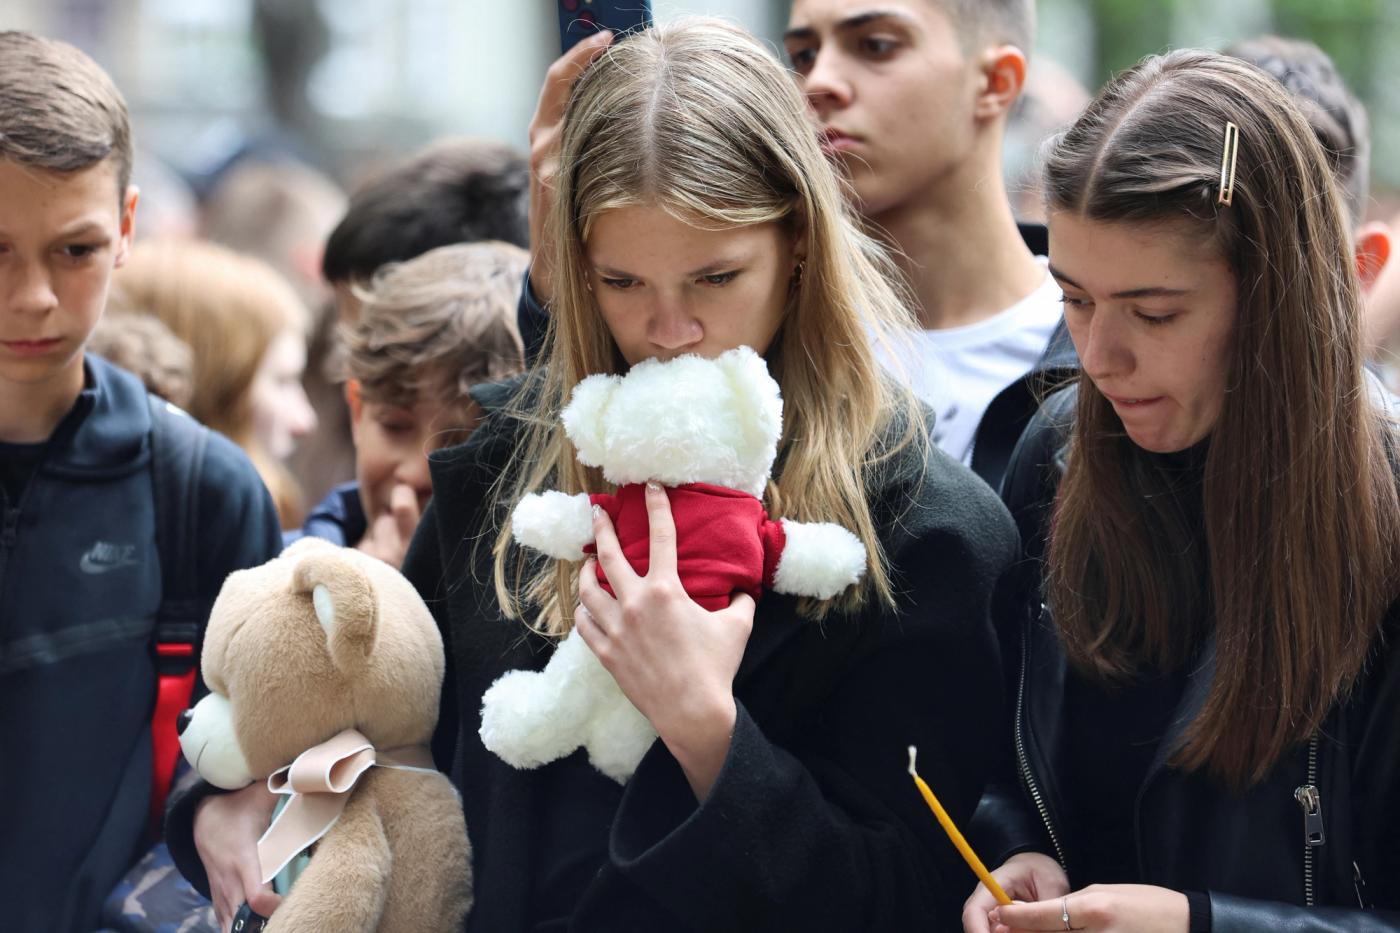 People react as they pay tribute following a school mass shooting, after a boy opened fire on others, killing fellow students and staff, in Belgrade, Serbia May 4, 2023. REUTERS/Zorana Jevtic